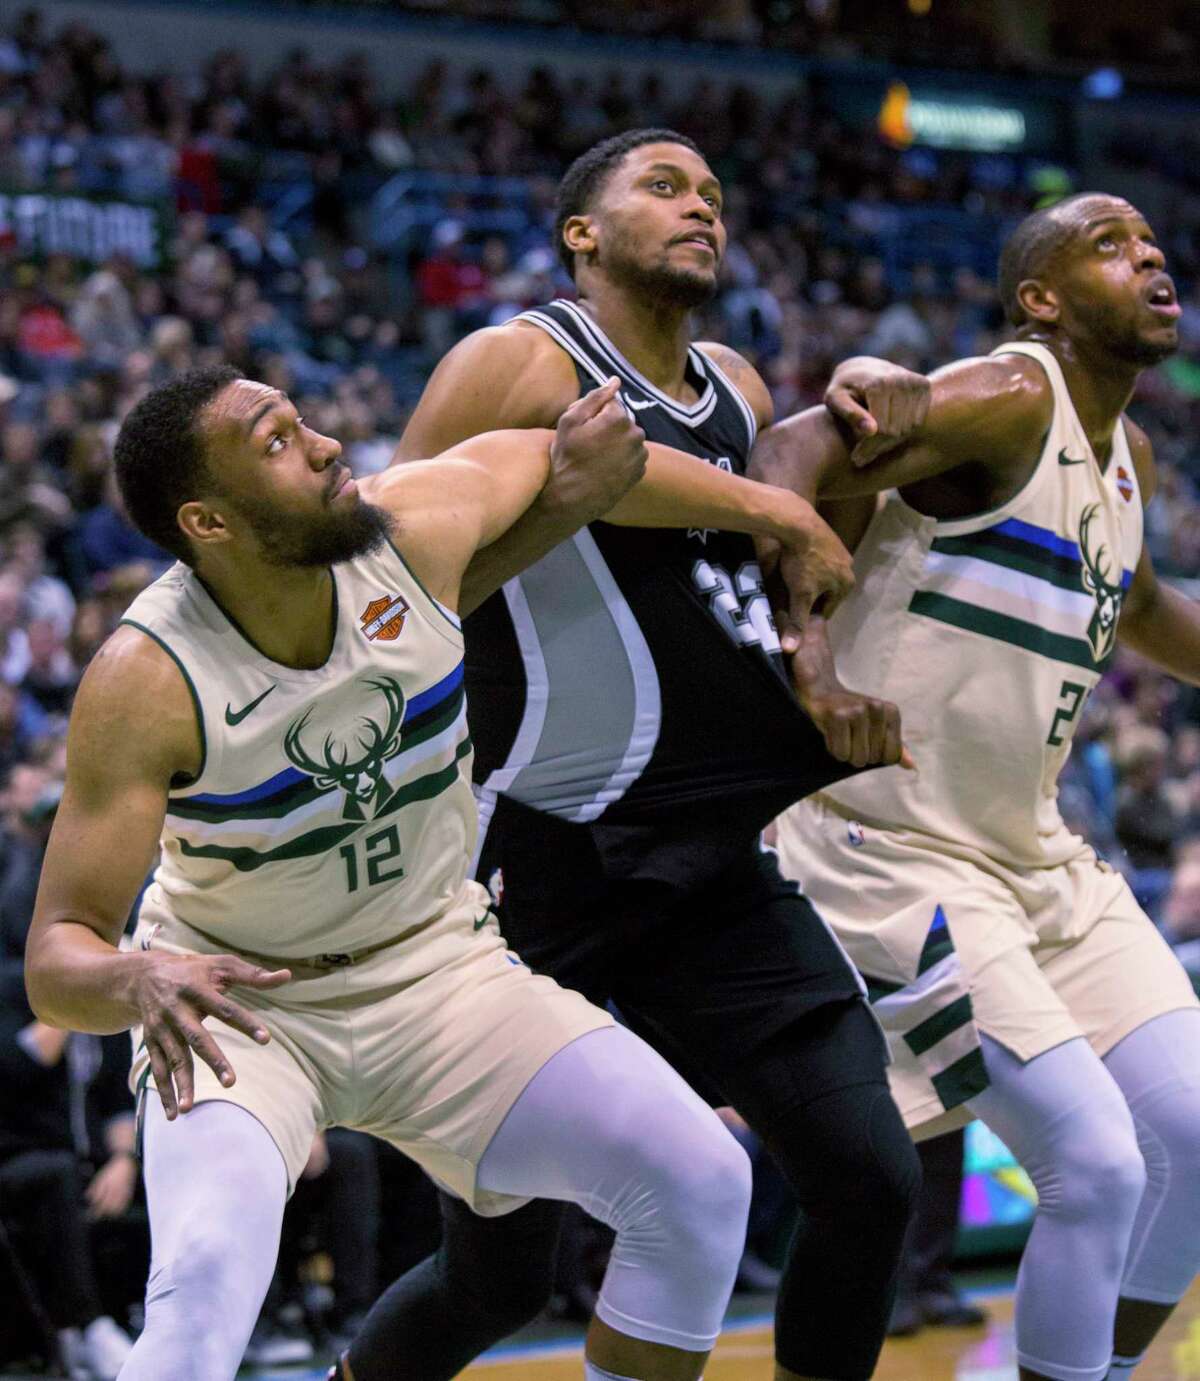 San Antonio Spurs forward Rudy Gay, center, is guarded by Milwaukee Bucks forward Jabari Parker, left and Khris Middleton, right, during the second half of an NBA basketball game Sunday, March 25, 2018, in Milwaukee. (AP Photo/Darren Hauck)